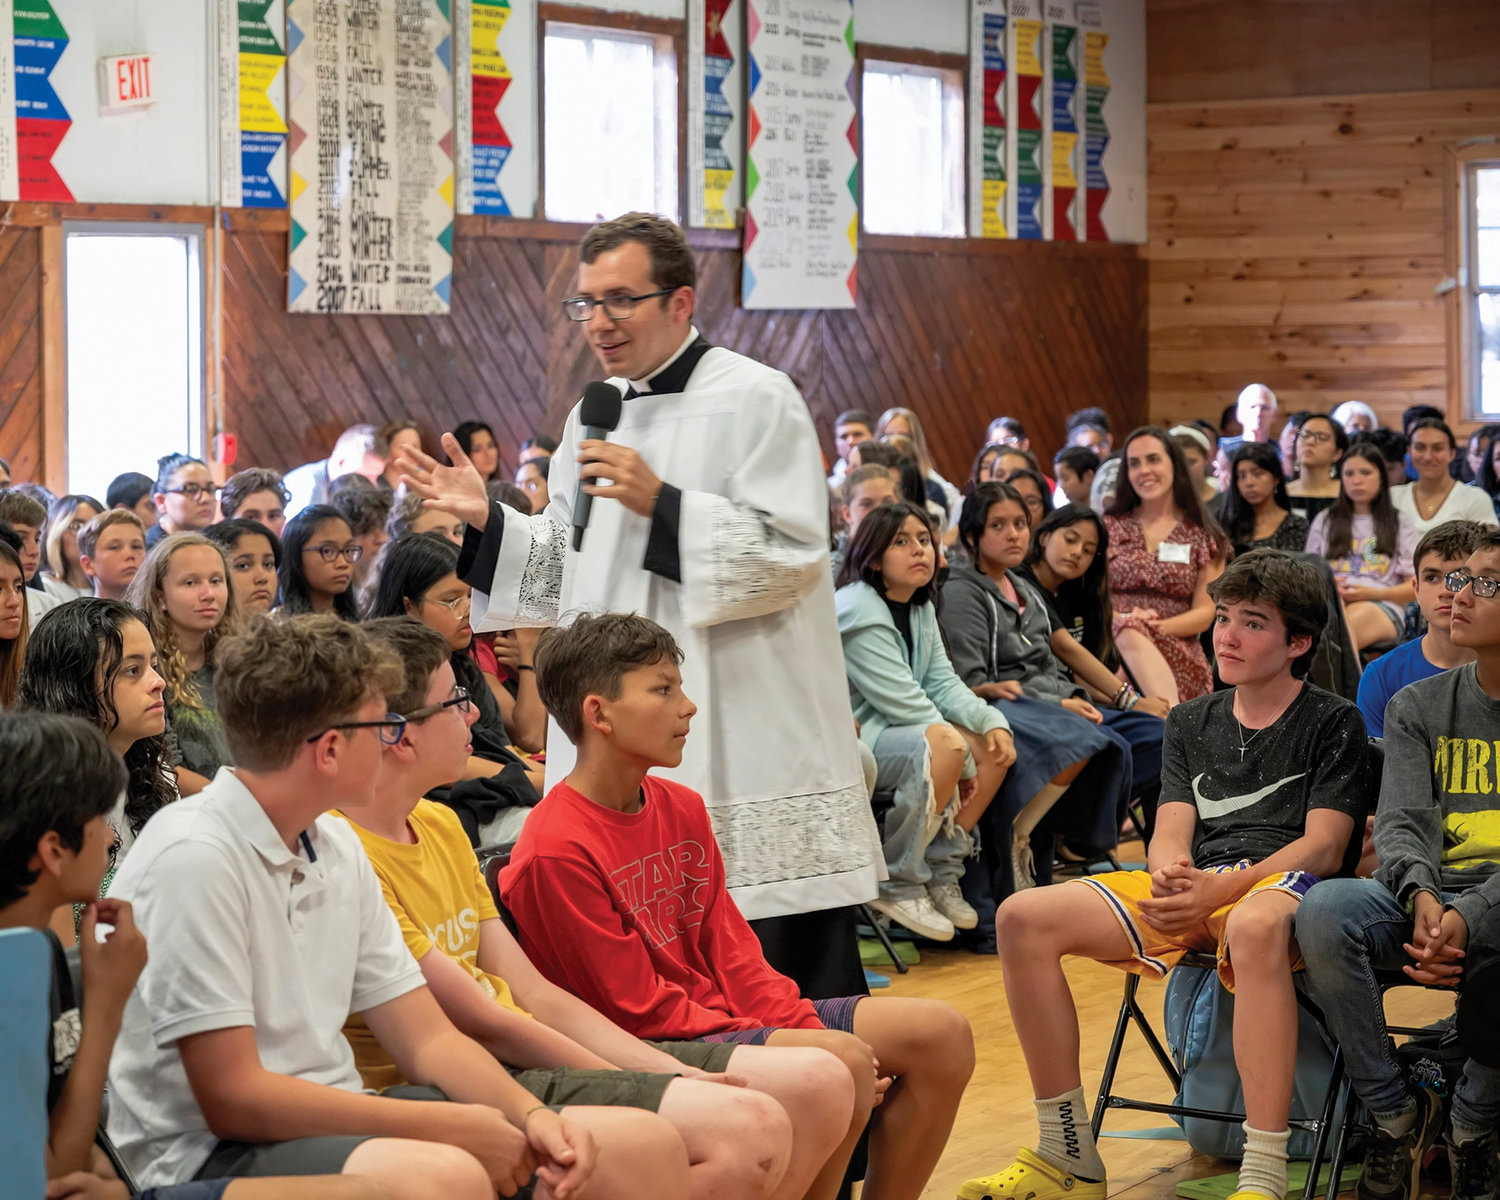 Joseph Haas, a seminarian at St. Joseph’s Seminary in Dunwoodie and a parishioner of St. Mary’s in Washingtonville, speaks to campers and staff before the start of Mass.